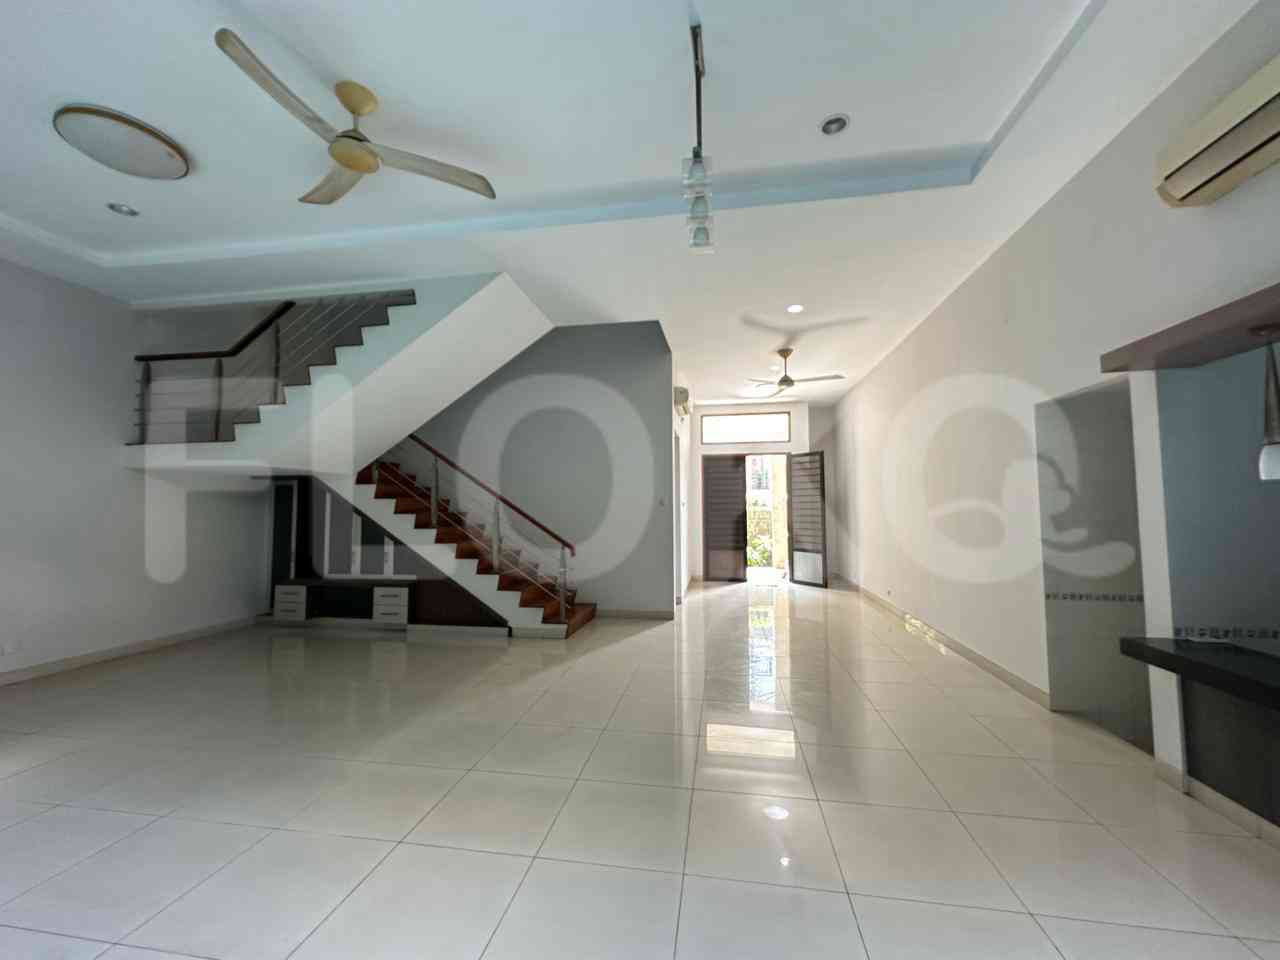 400 sqm, 4 BR house for rent in Senayan 2